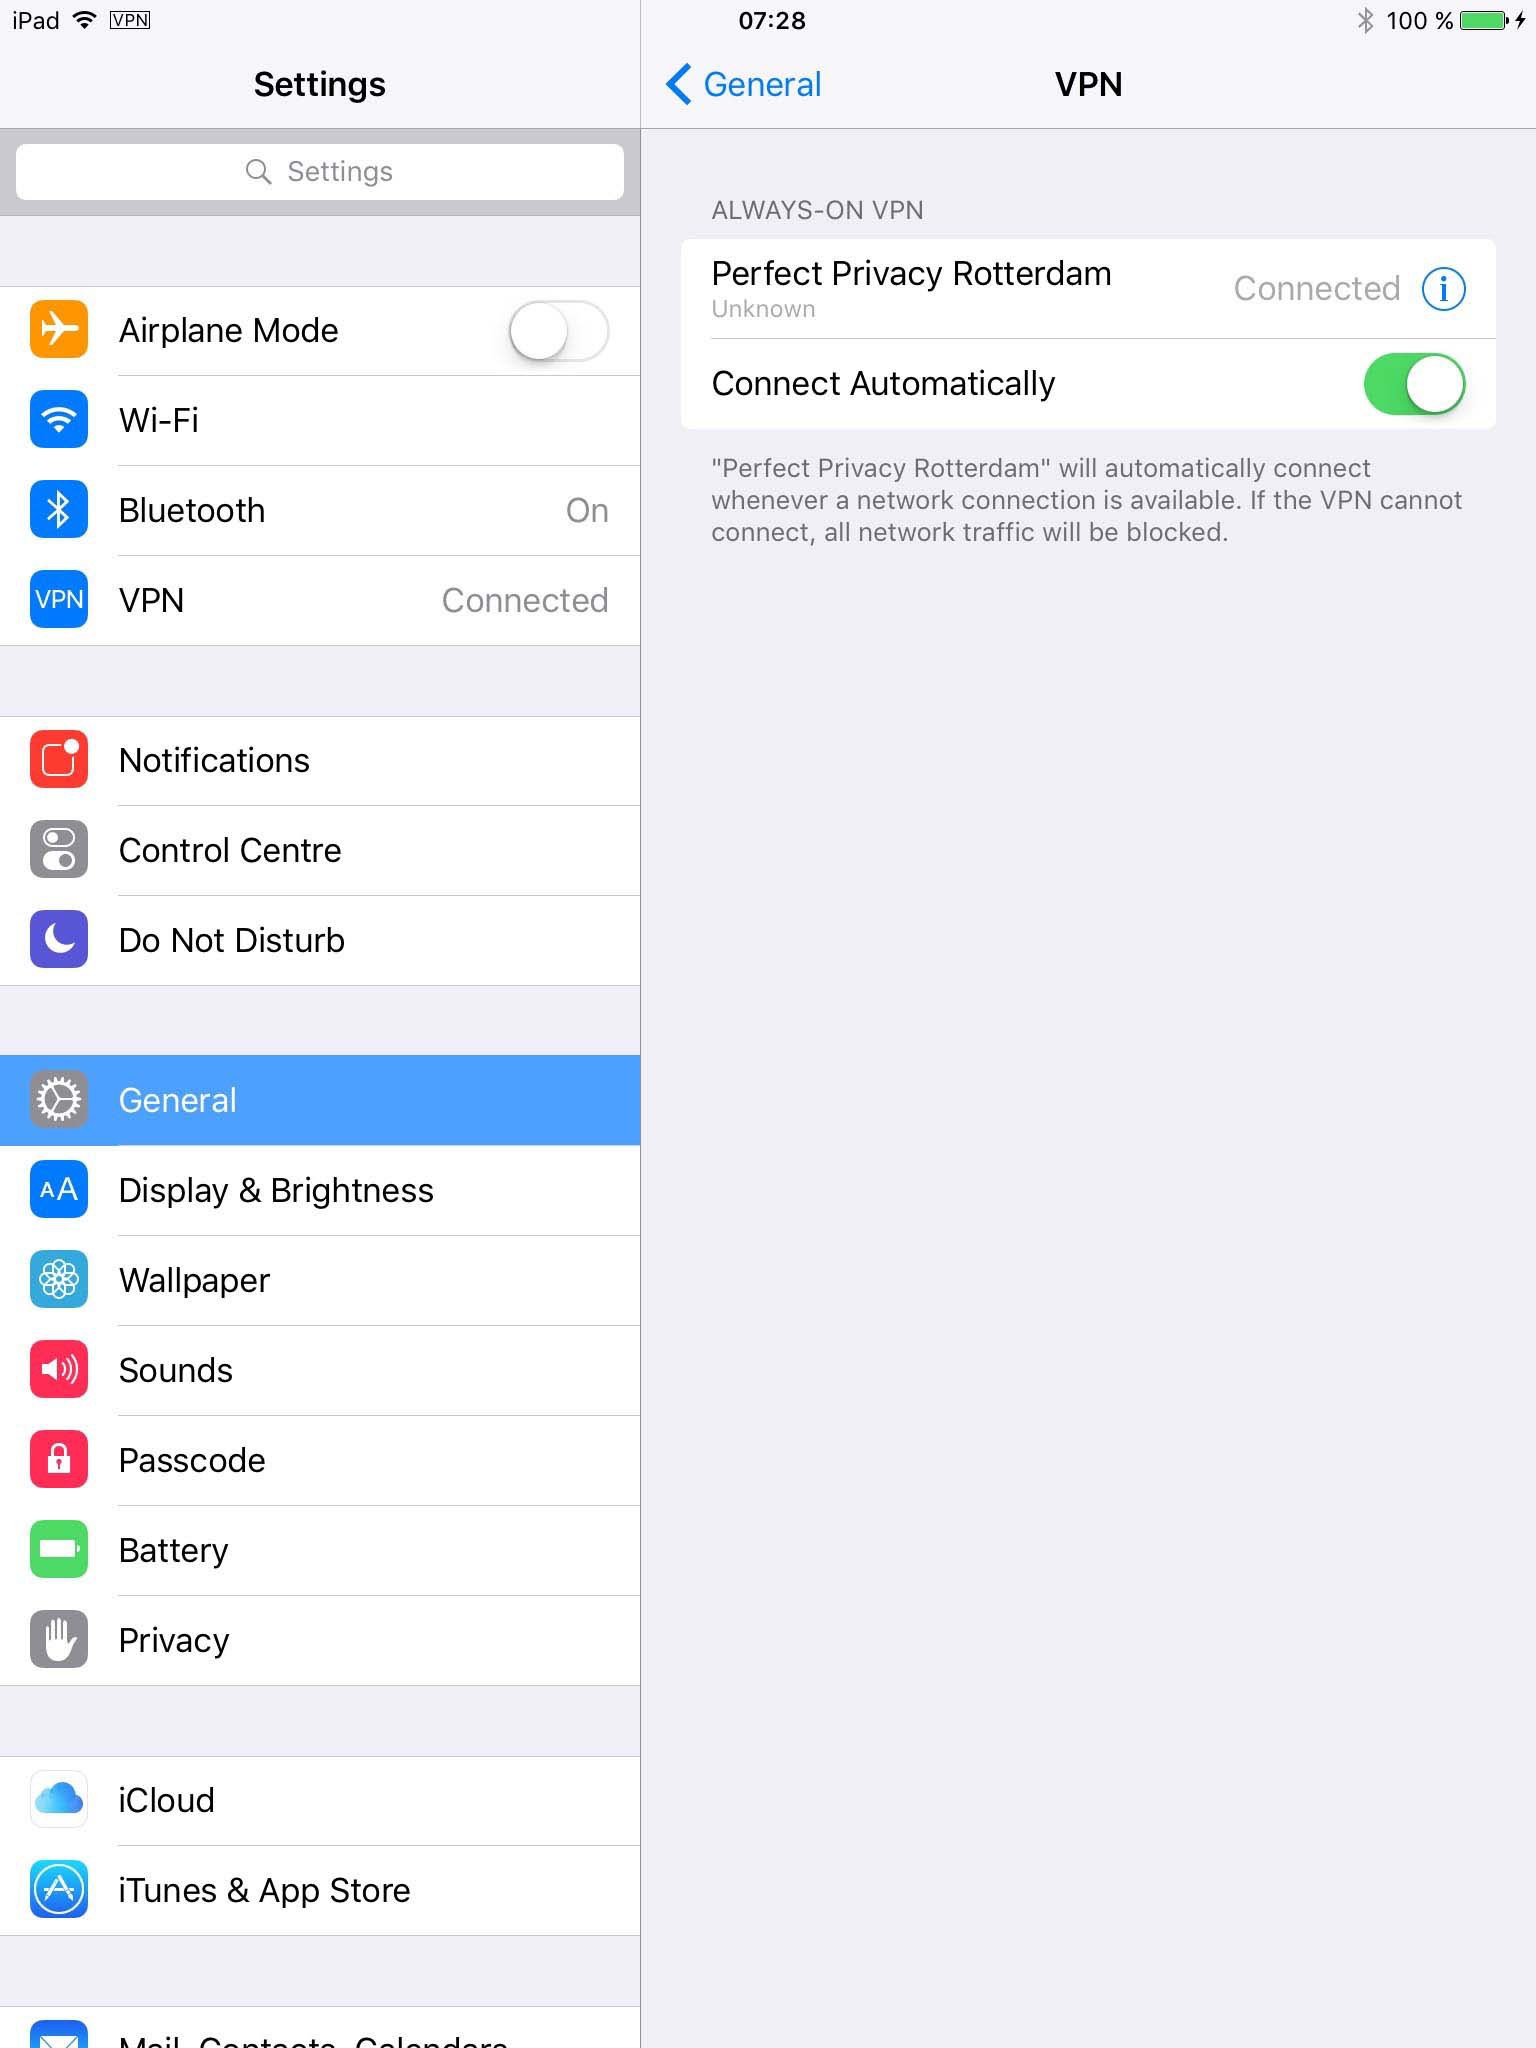 iPad: General settings connected with Perfect Privacy VPN | Always-On VPN with iPhone and iPad